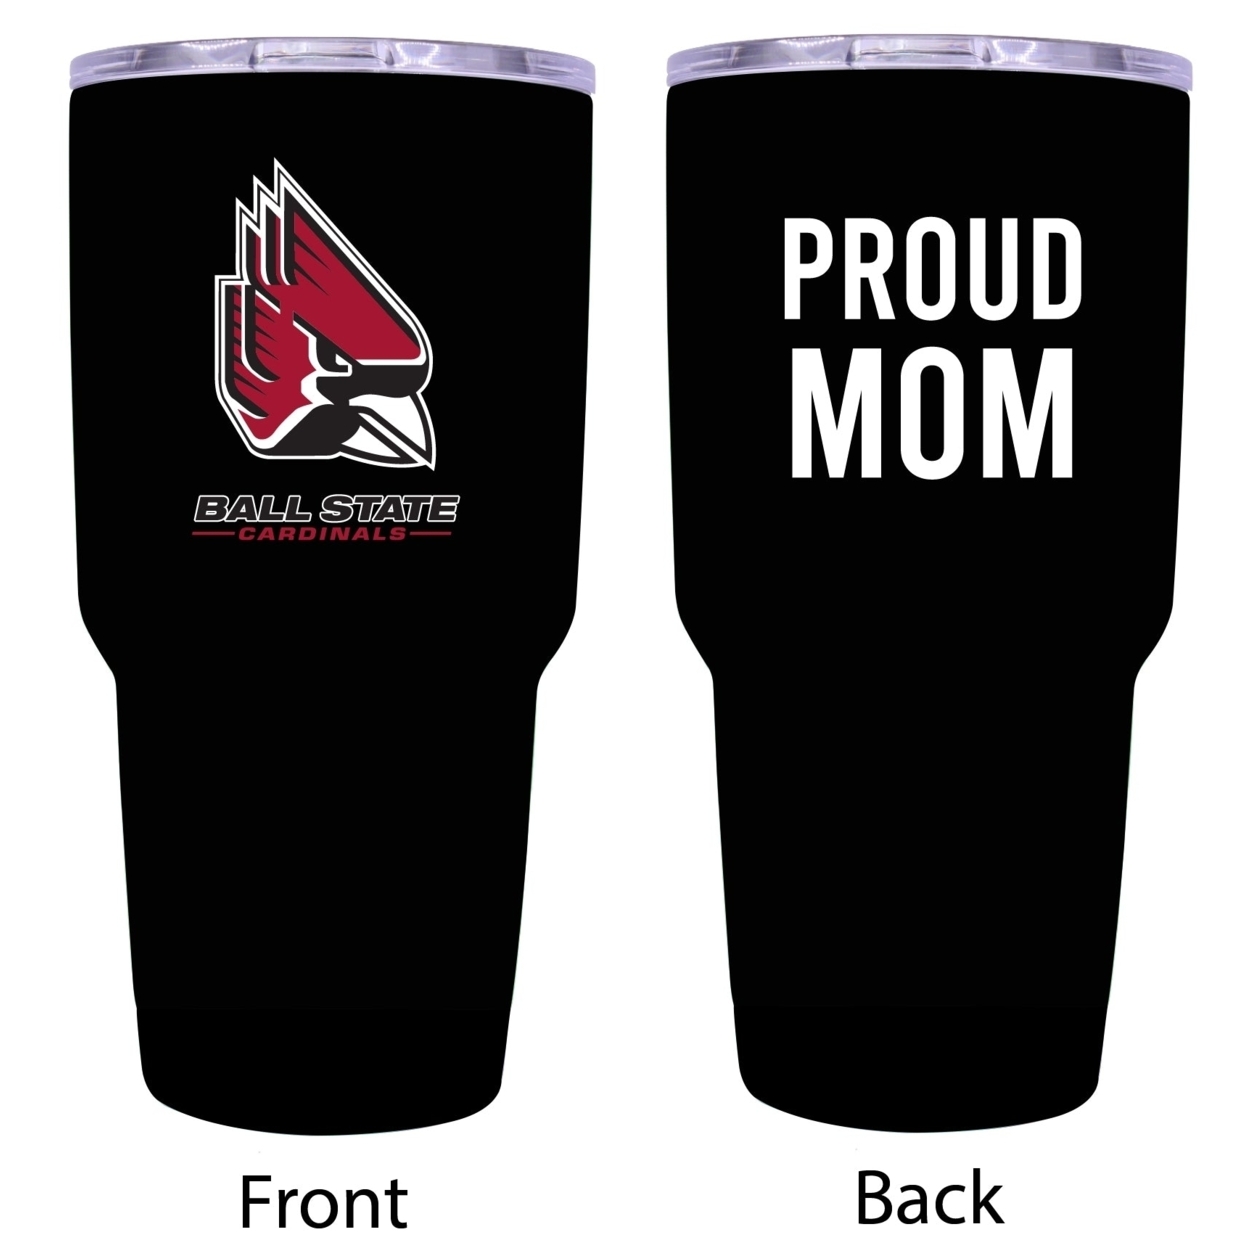 R And R Imports Ball State University Proud Mom 24 Oz Insulated Stainless Steel Tumblers Black.